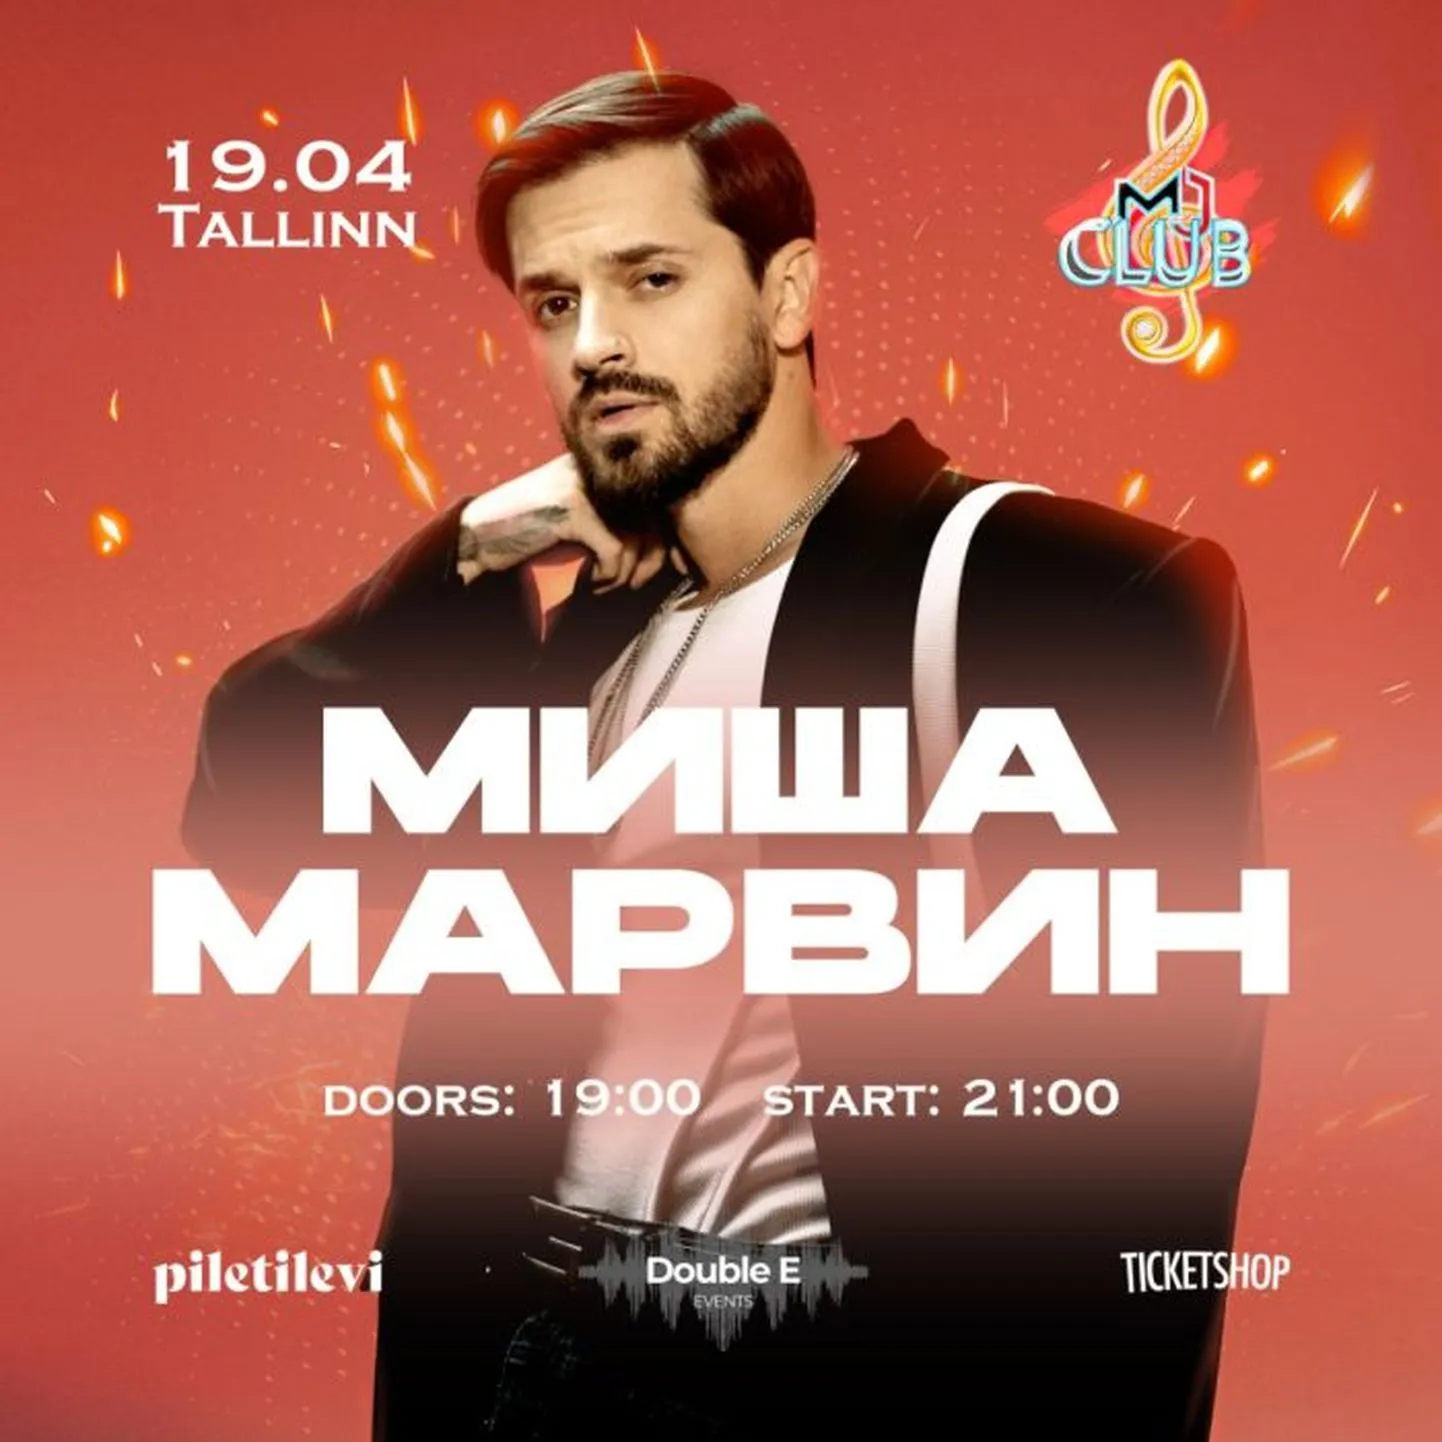 Misha Marvin's concert in Tallinn was supposed to take place on April 19.